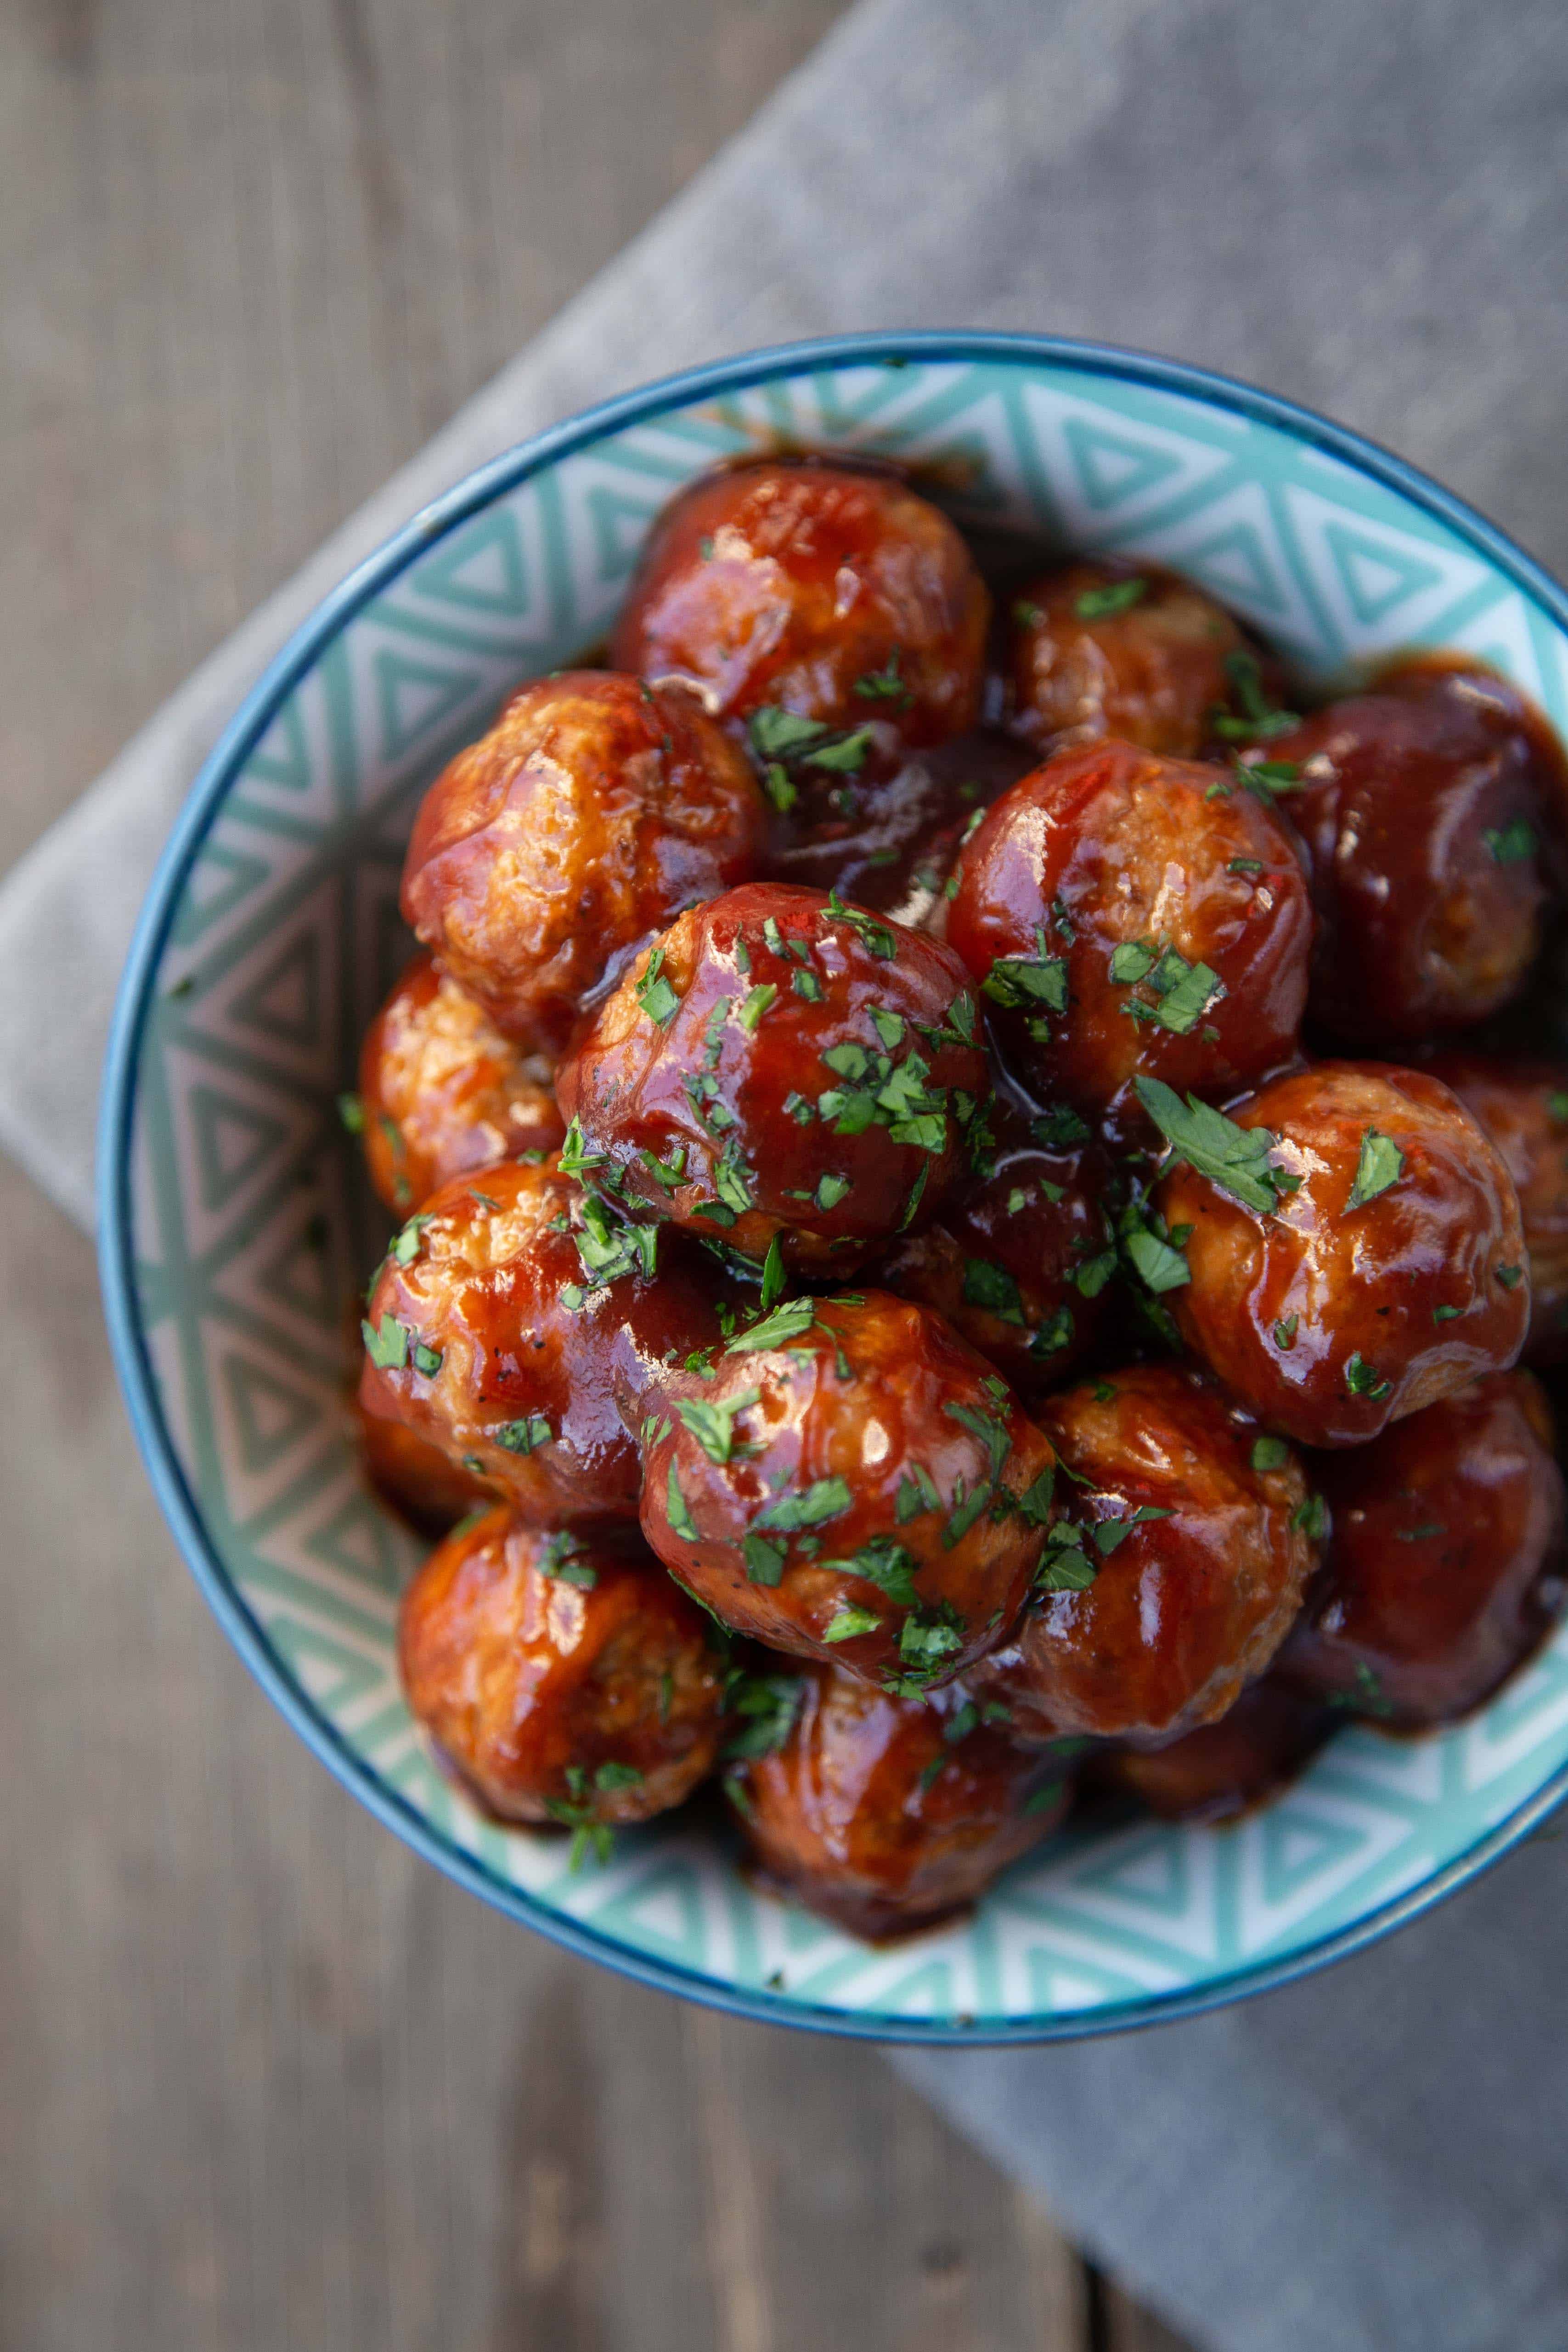 BBQ meatballs in a blue patterned bowl, topped with parsley.